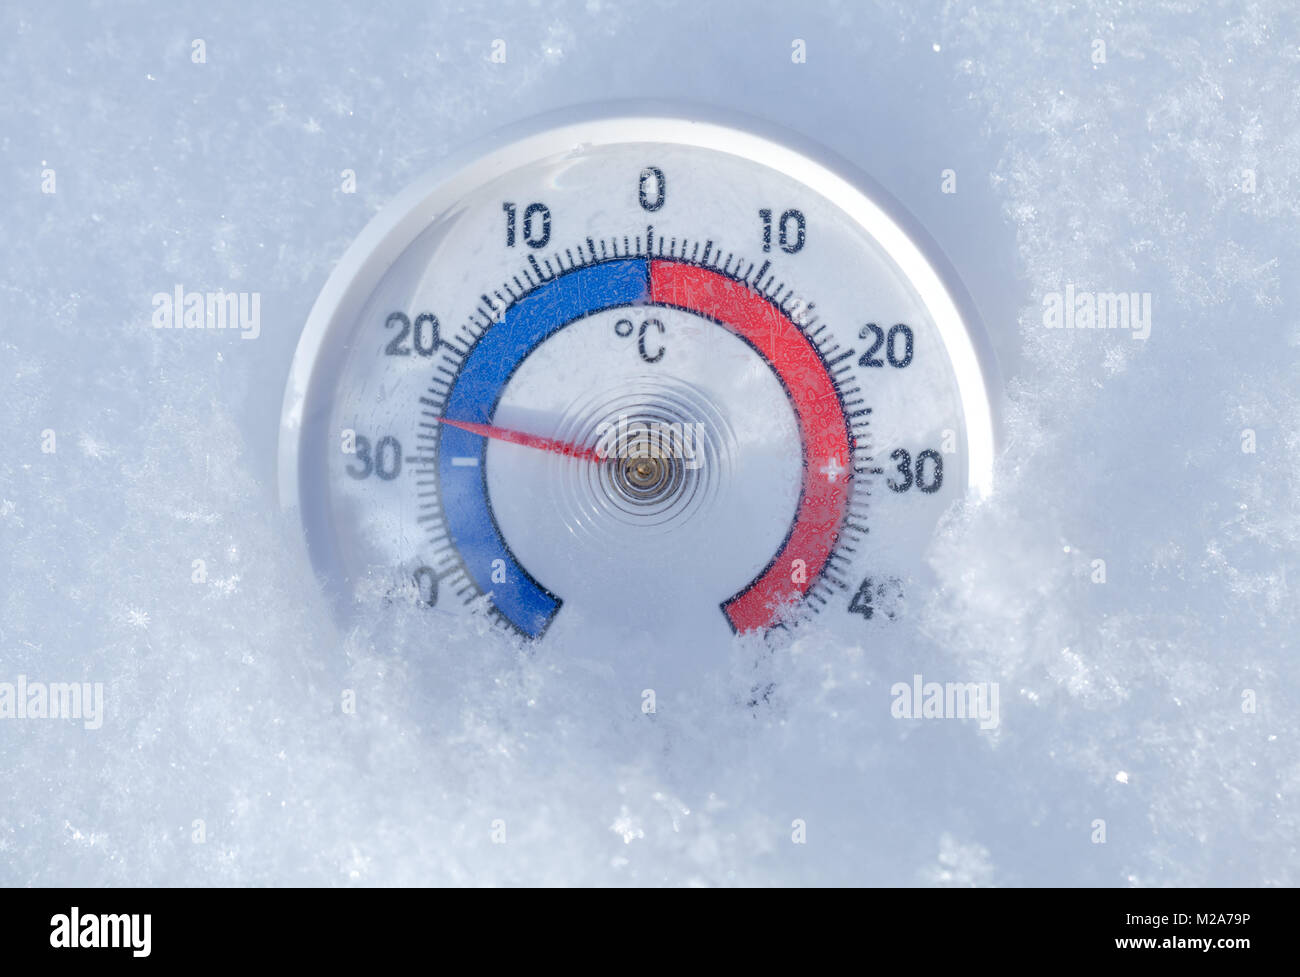 Thermometer with celsius scale placed in a fresh snow showing sub-zero temperature minus 26 degree - frosty winter weather concept Stock Photo